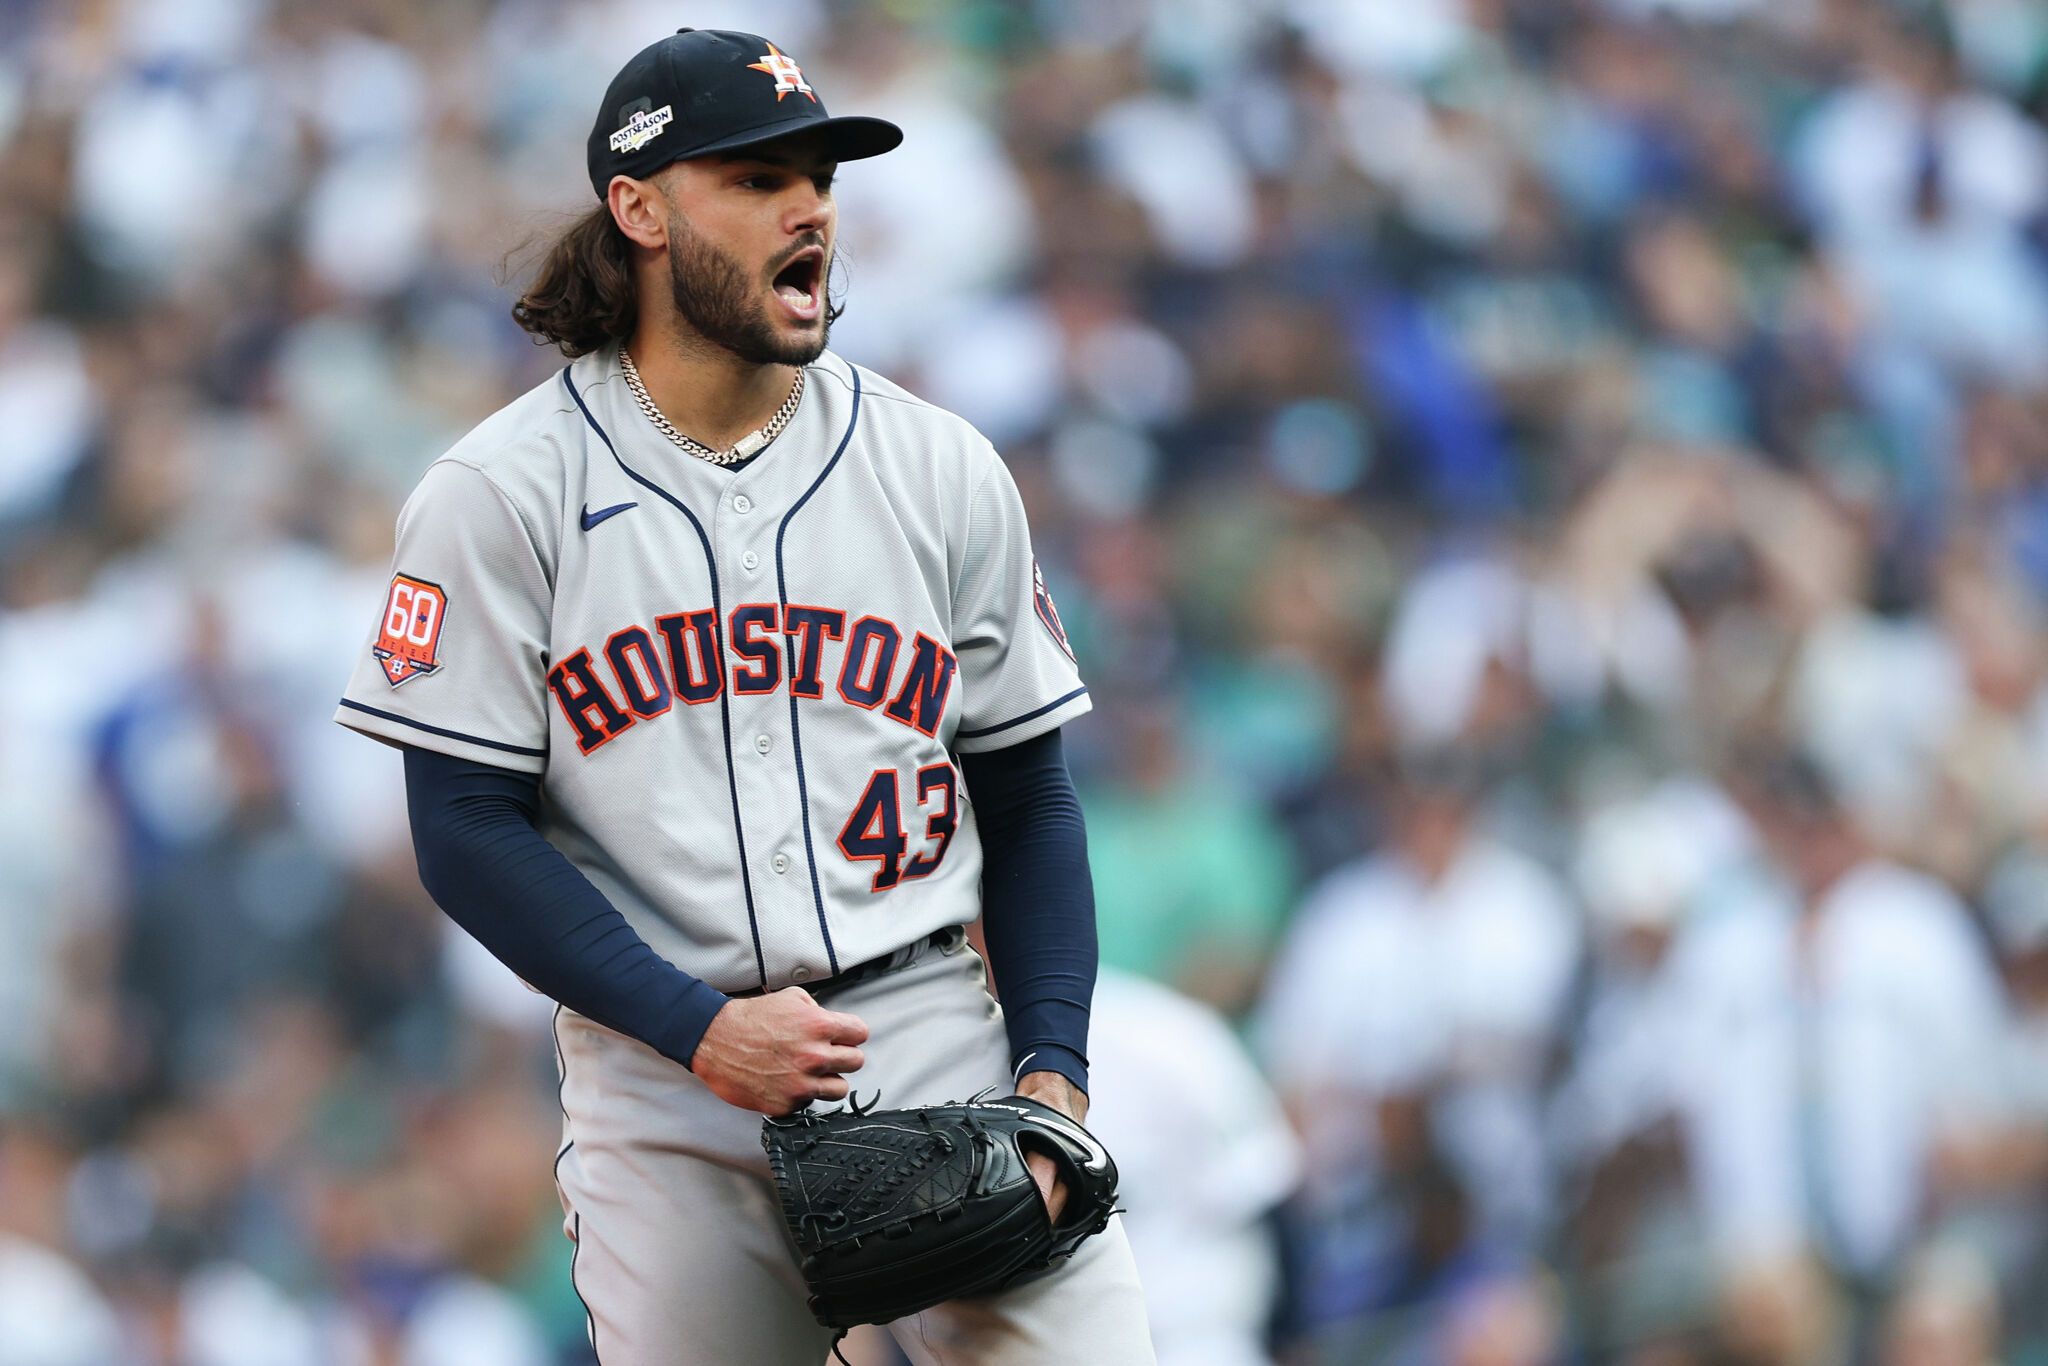 McCullers' track record made him easy choice for Astros in Game 3